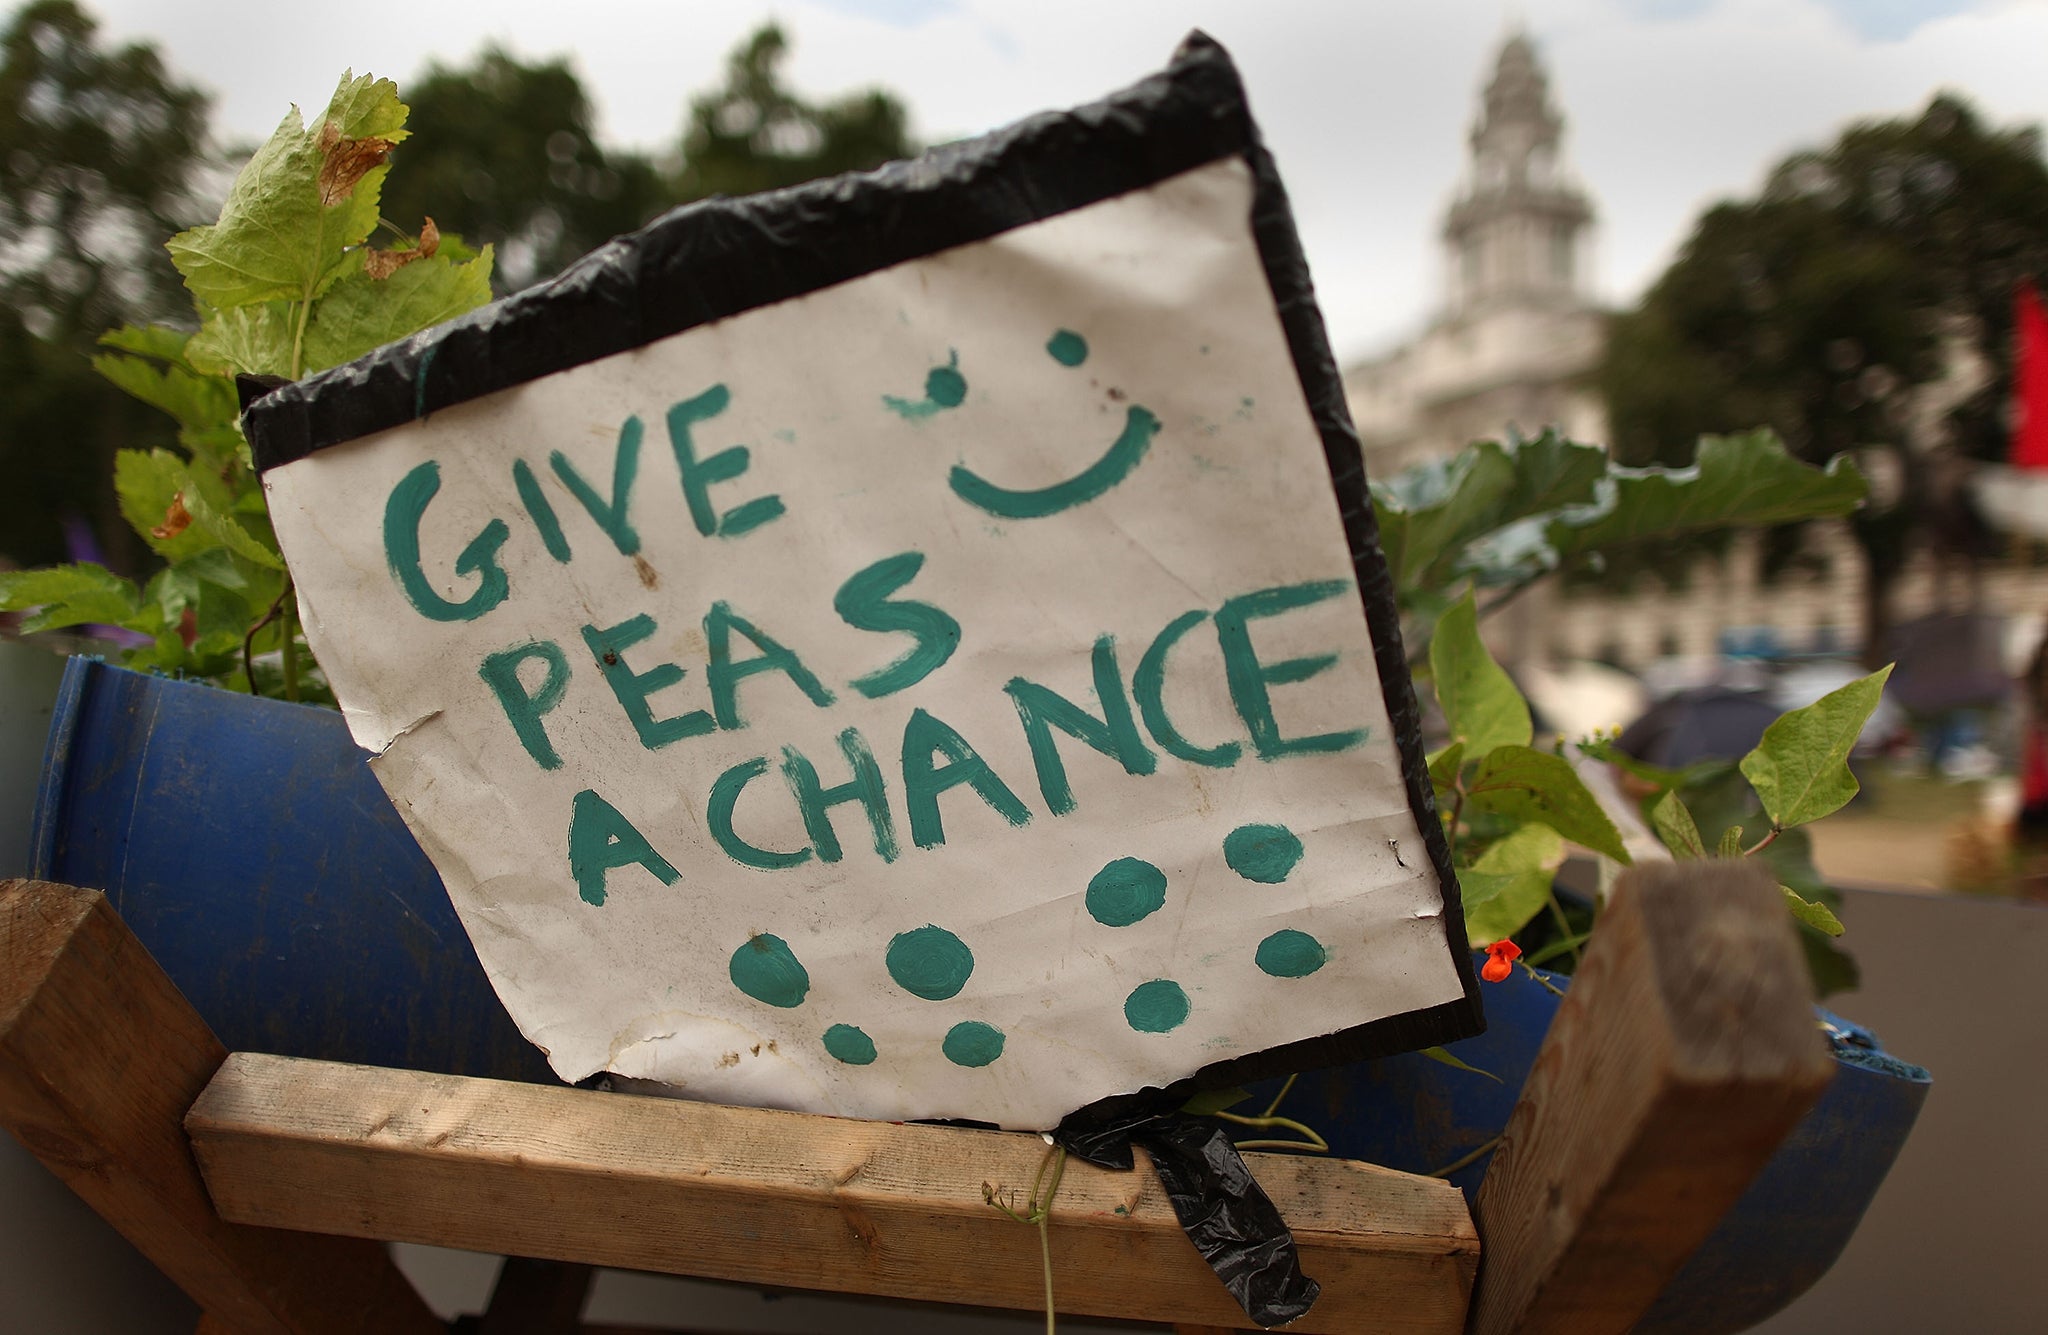 Give Peas a Chance?